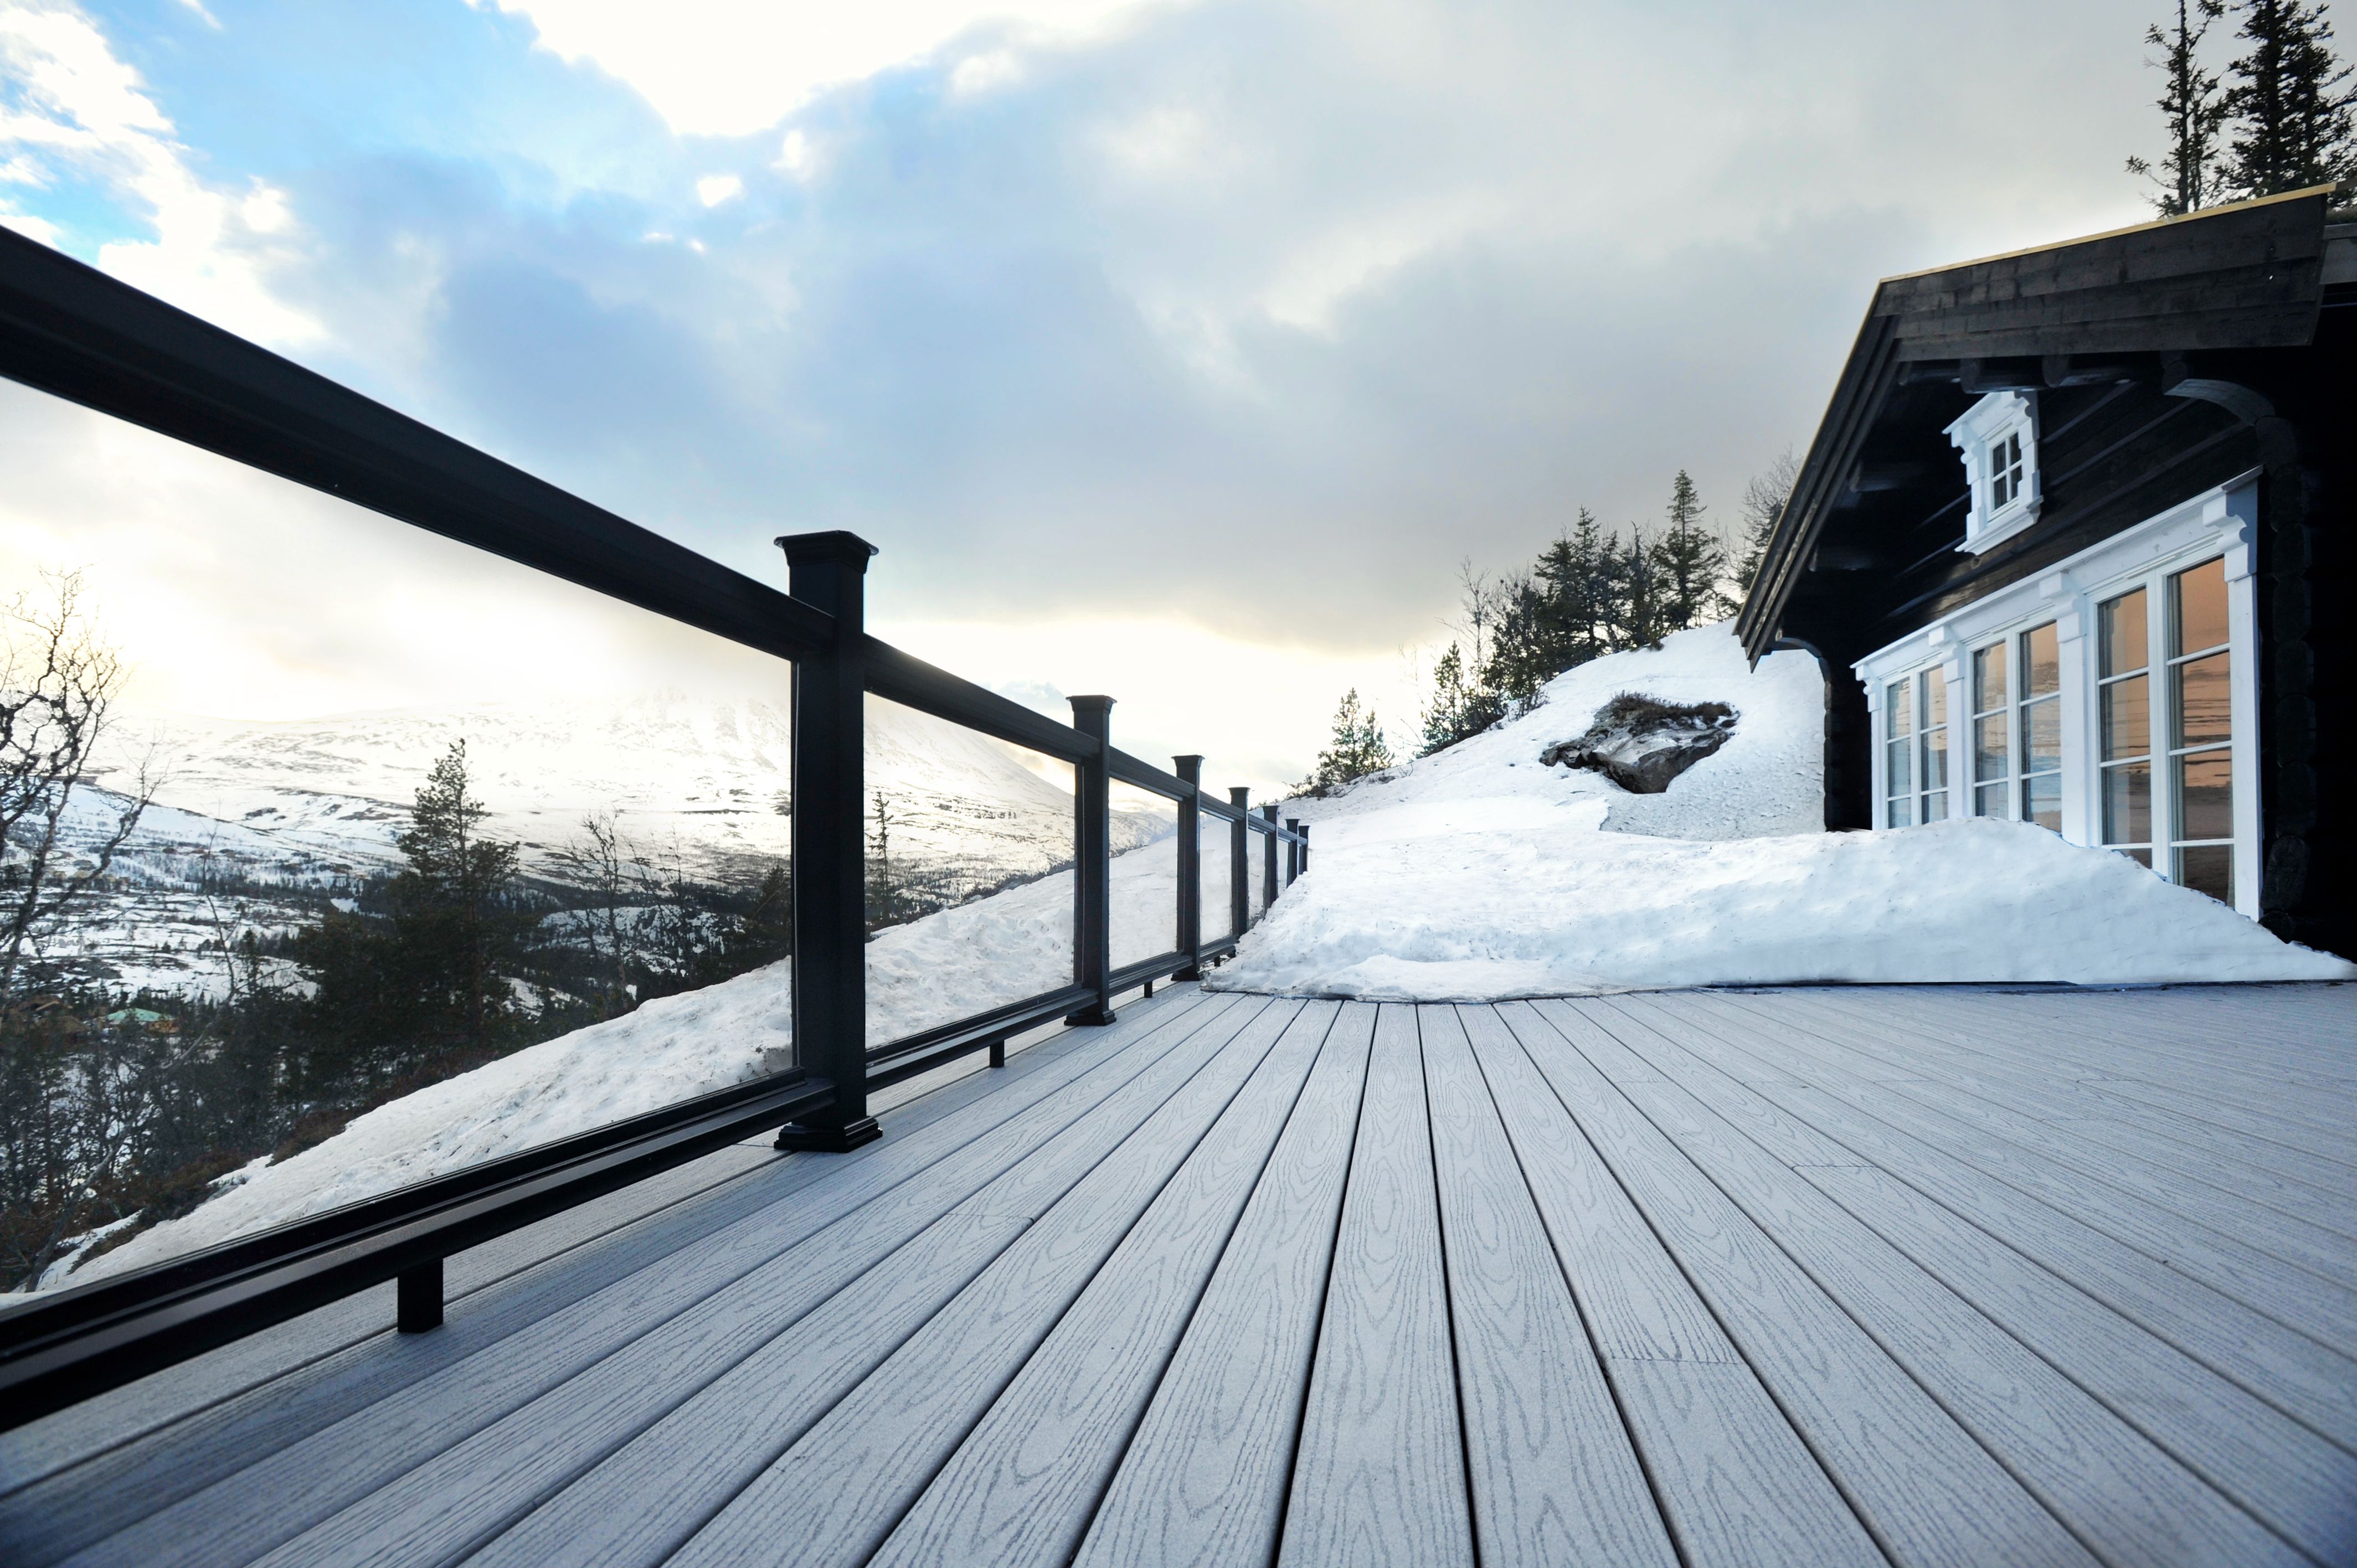 Removing Snow and Ice from Decks: